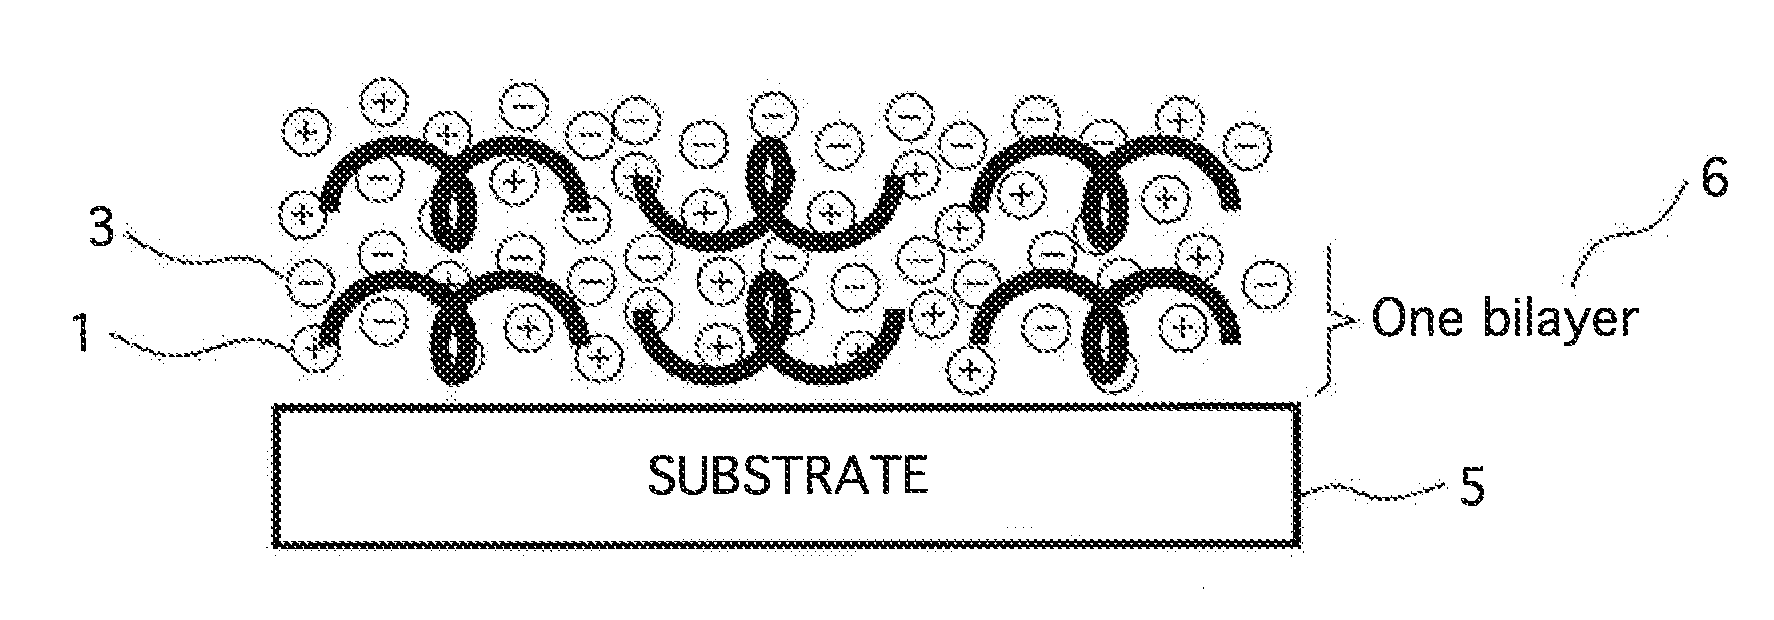 Electrically conductive and dissipative polyurethane foams